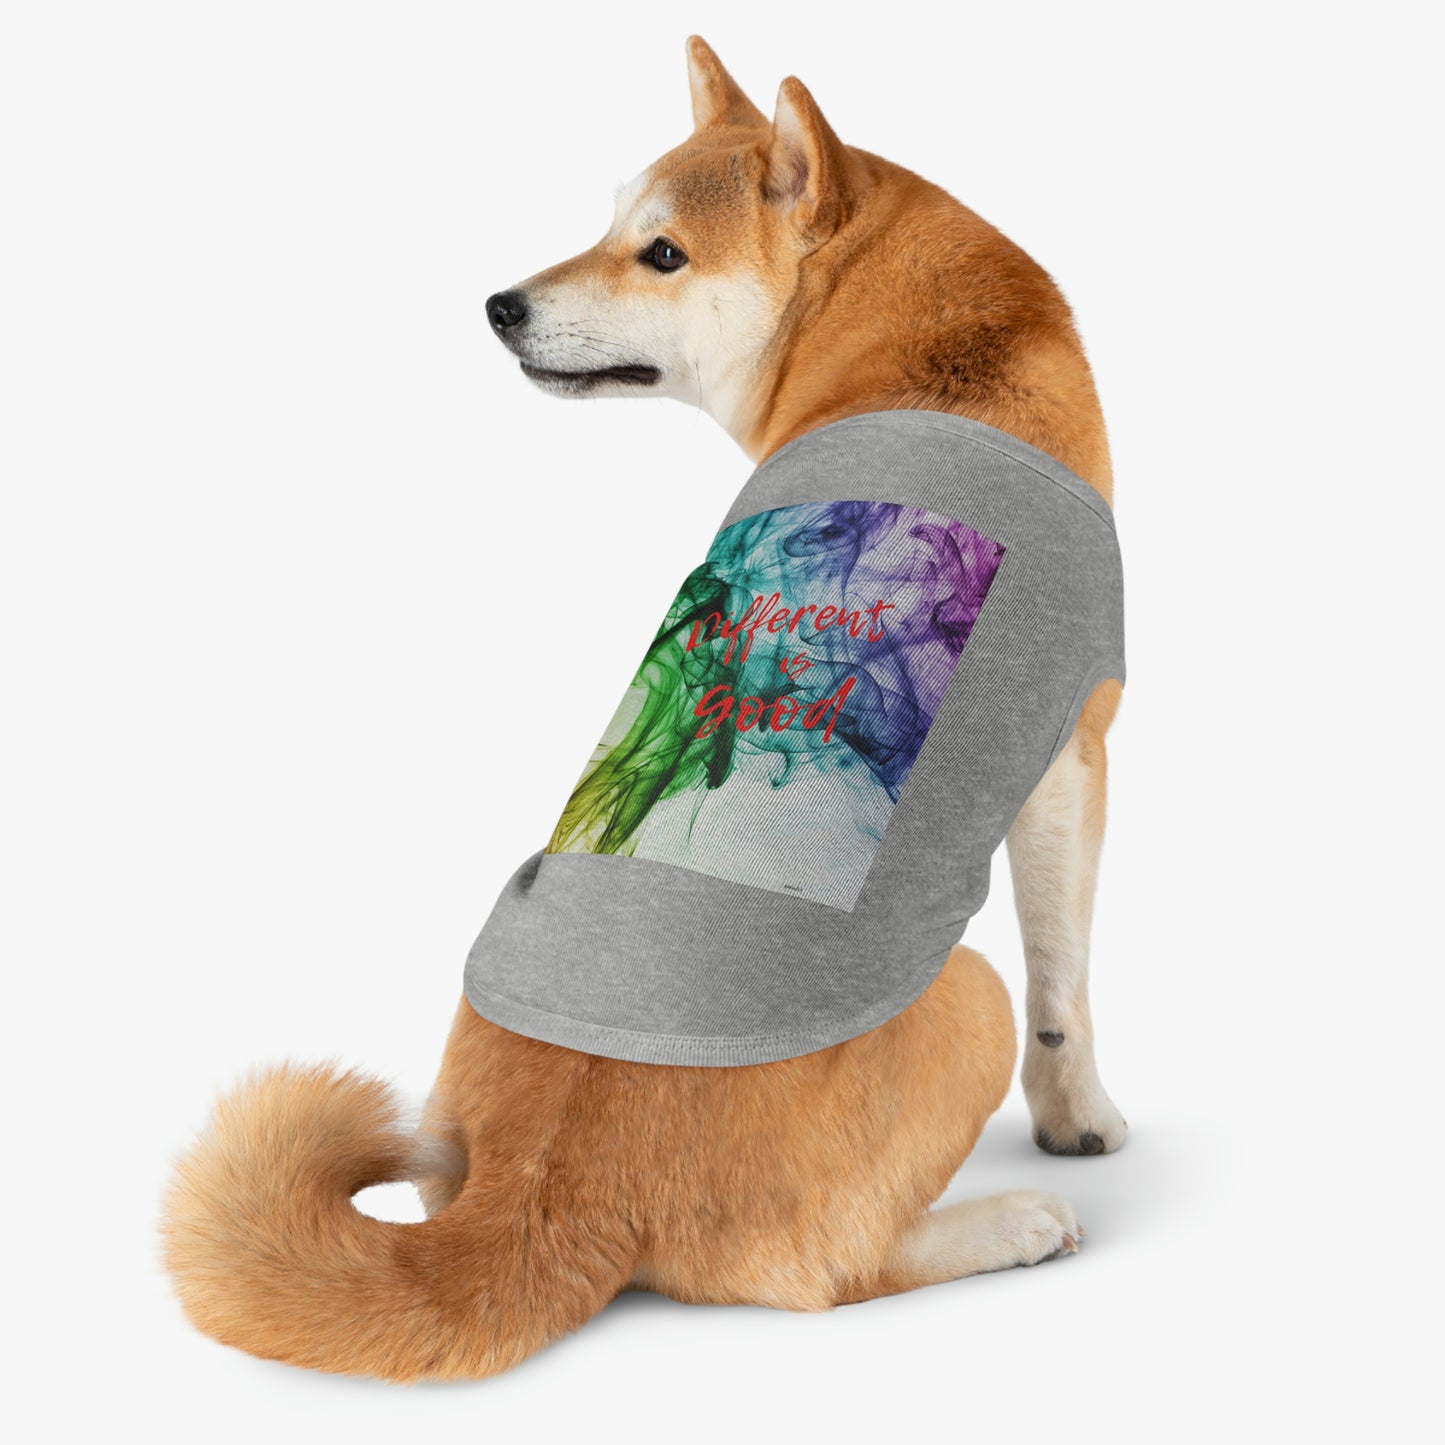 Different Is Good Pet Tank Top